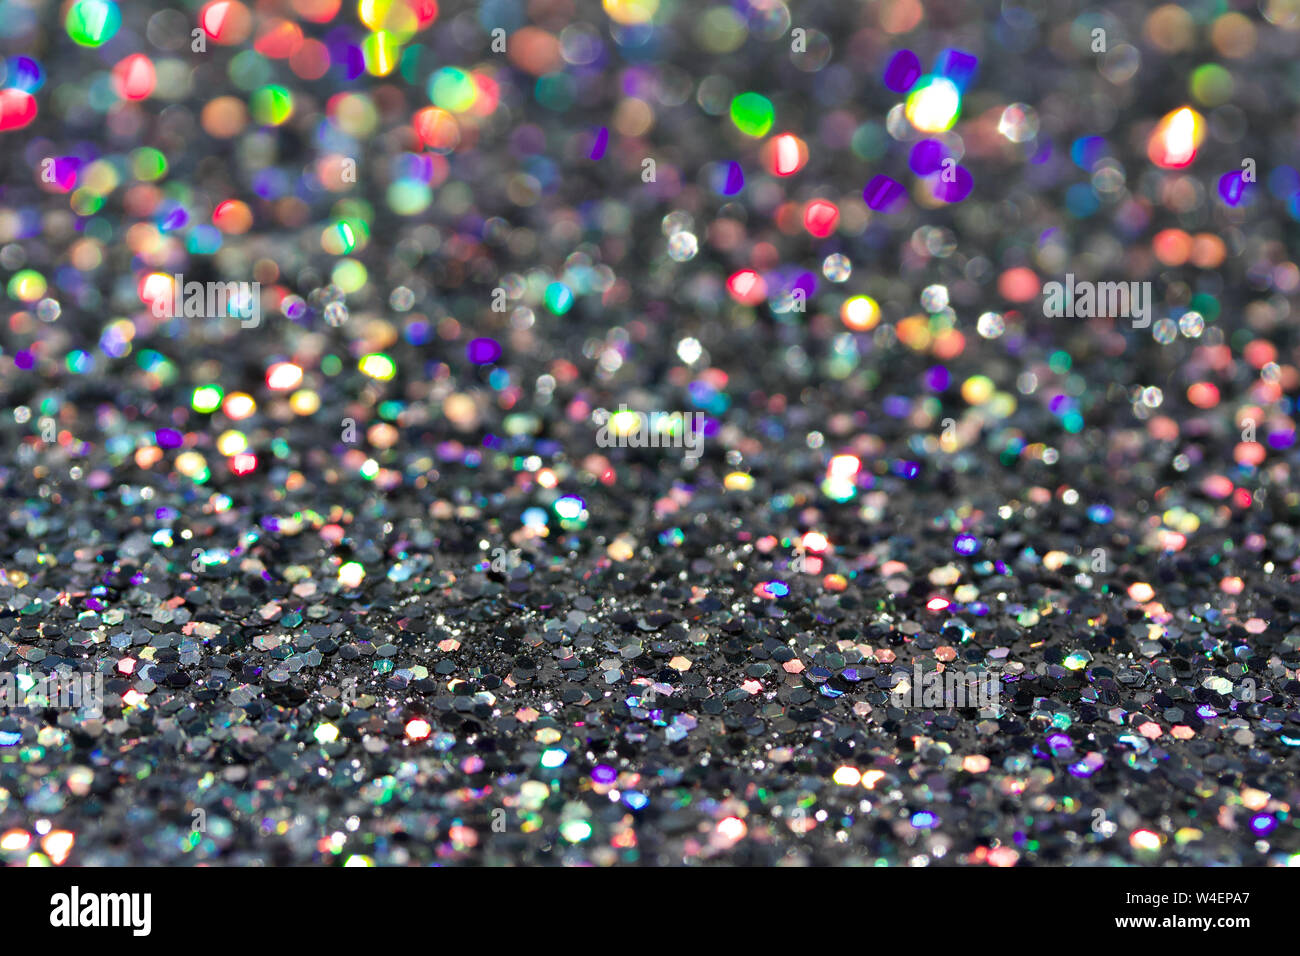 Abstract silver glitter background. High quality texture Stock Photo - Alamy